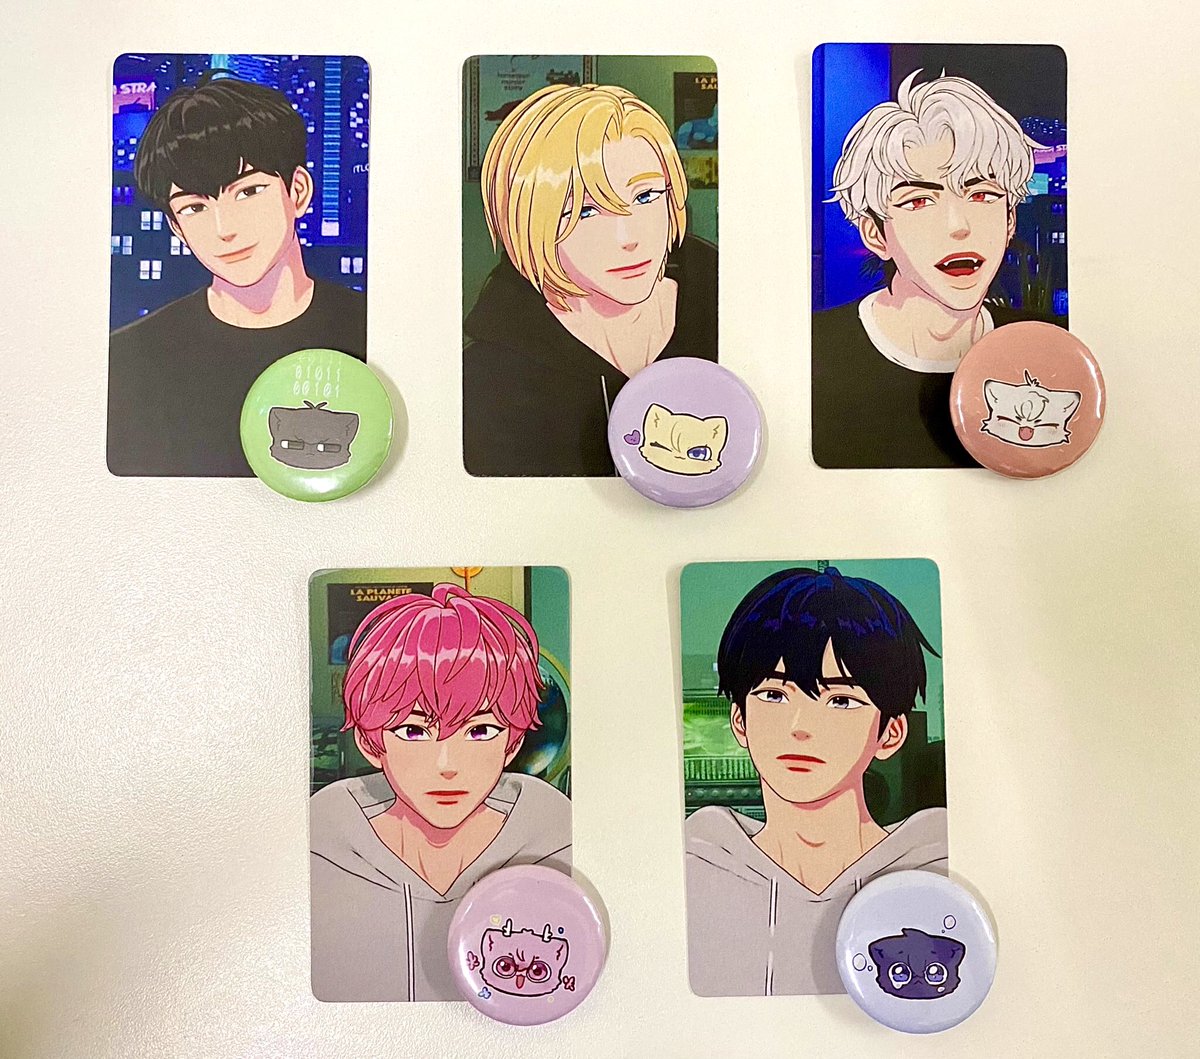 Hi PLLI 🇲🇾 !

I will be giving these badges and photocard as freebies for #DatewithSilverHoMy but the quantities is not much 🥹 I have extra from the previous cse. 

if u want to choose your bias the quantity is as follows :

💙 = 16
💜 = 20
💗 = 17
❤️ = 19
🖤 = 20